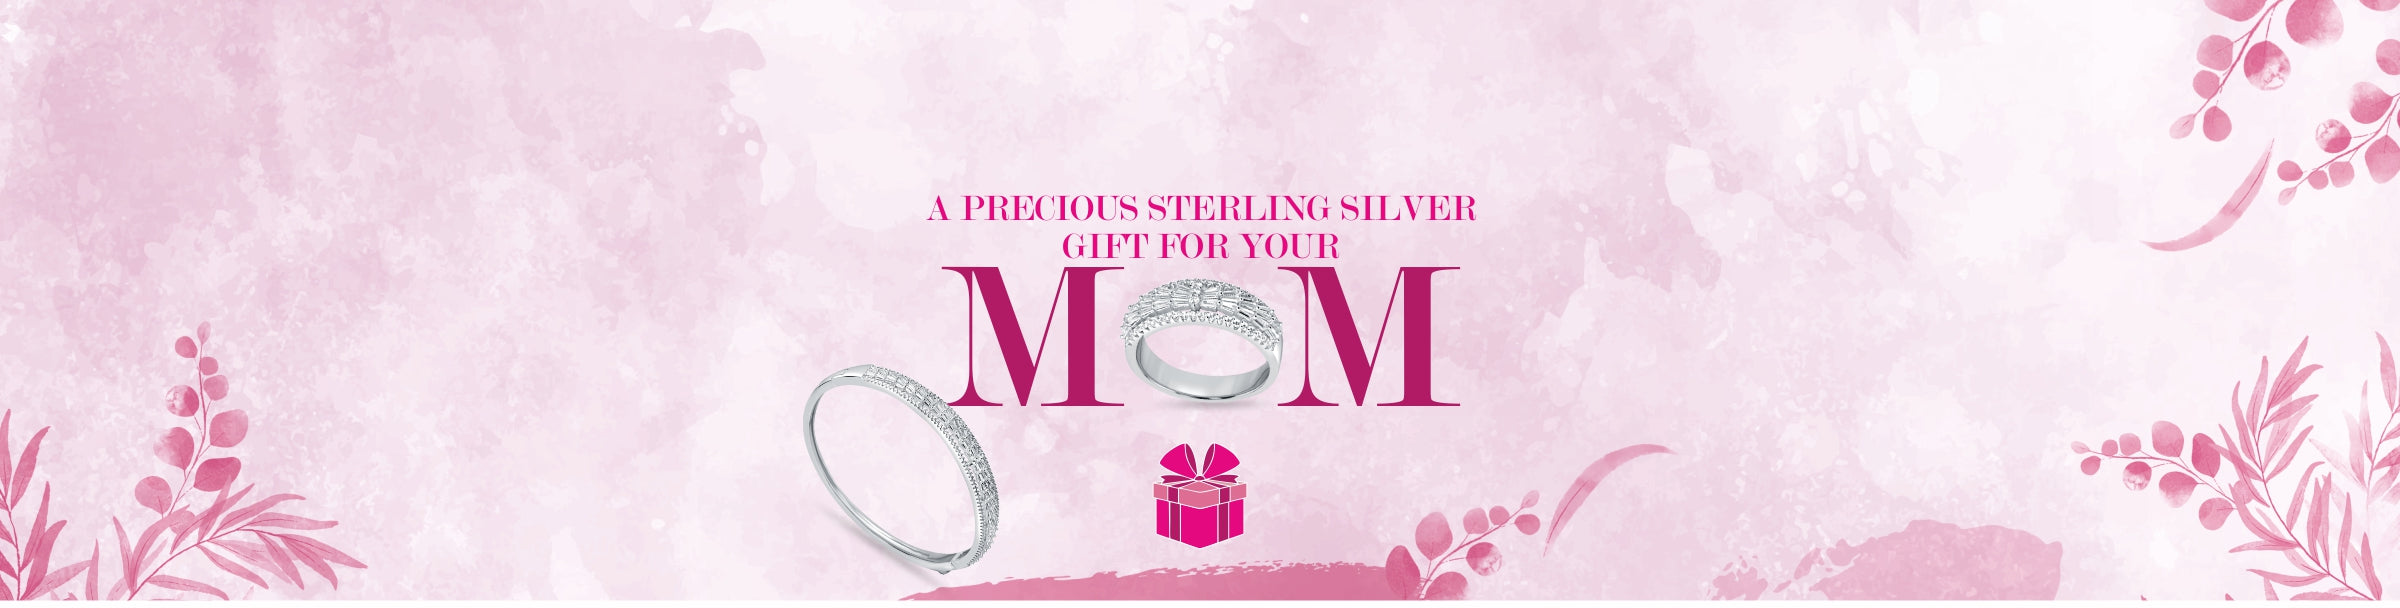 A Precious Sterling Silver Jewellery Gift for Your Beloved Mom on Mother’s Day